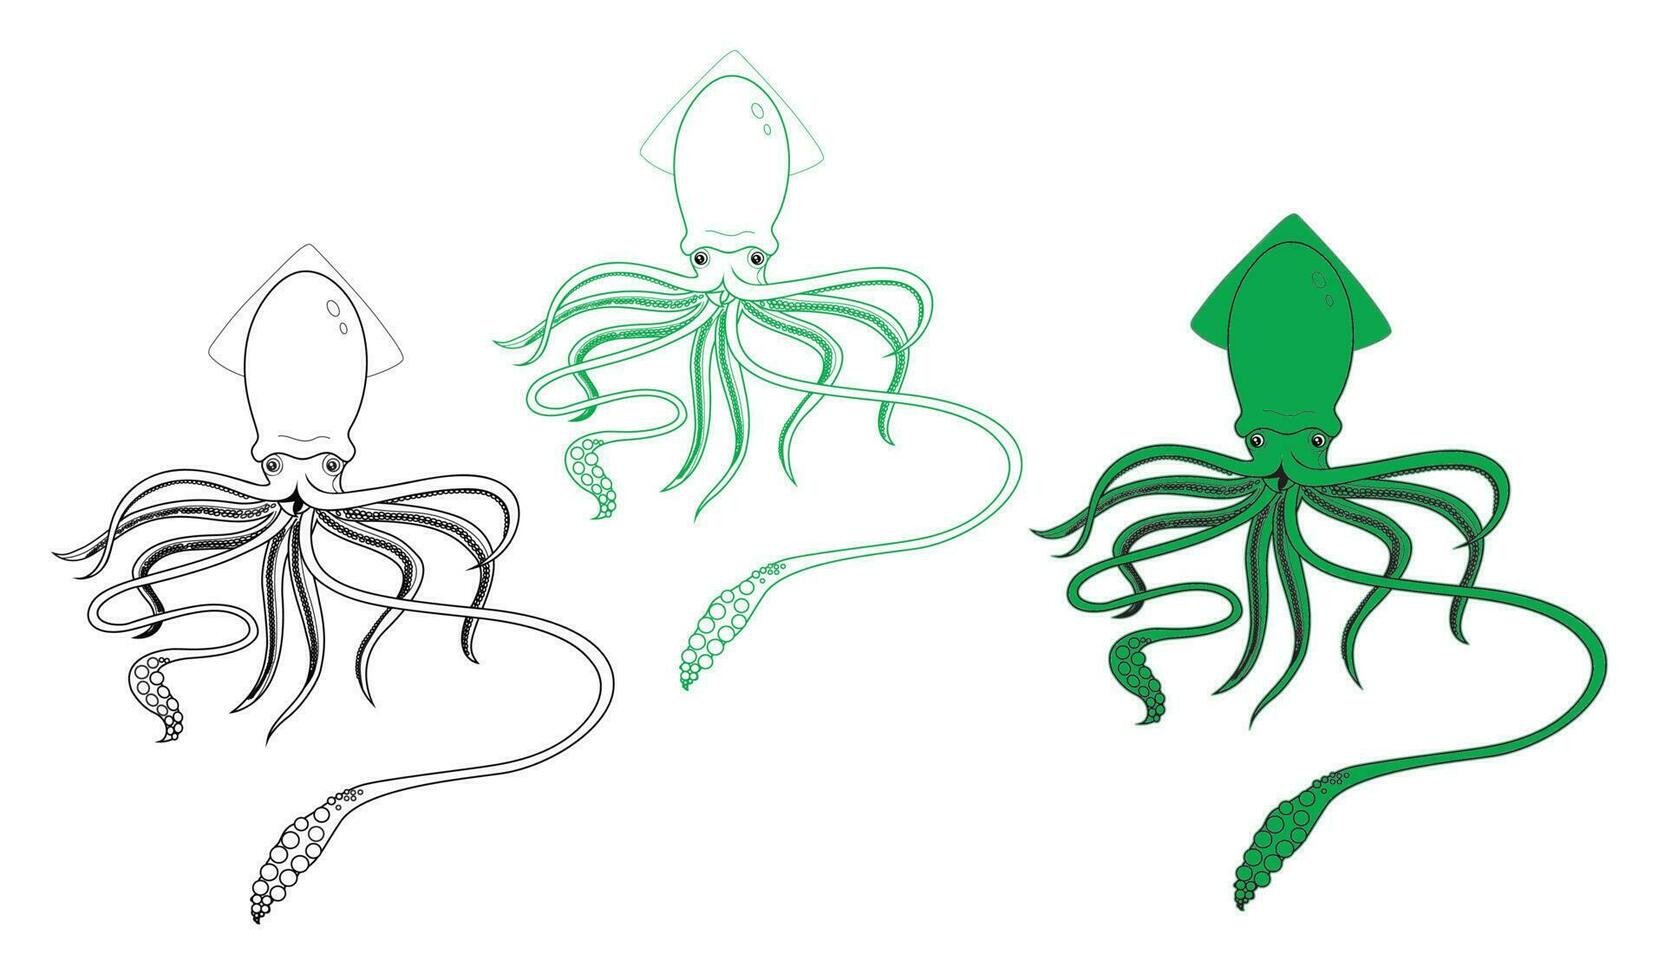 Tentacles of an octopus. Hand drawn vector illustration in engraving technique isolated on white background.